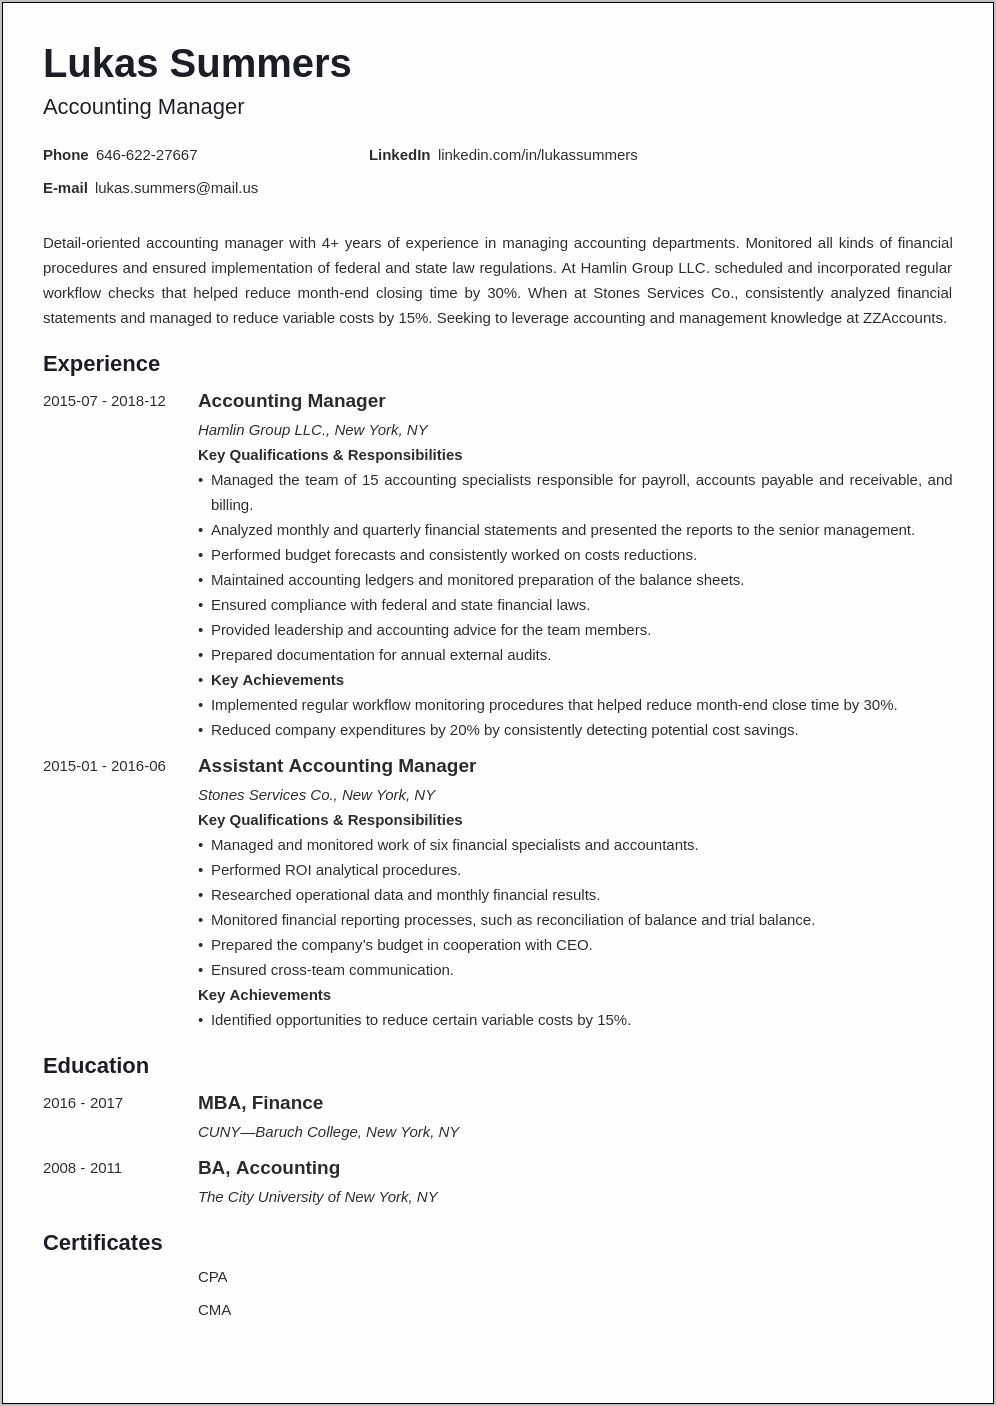 Resume Objectives For Accounting Manager